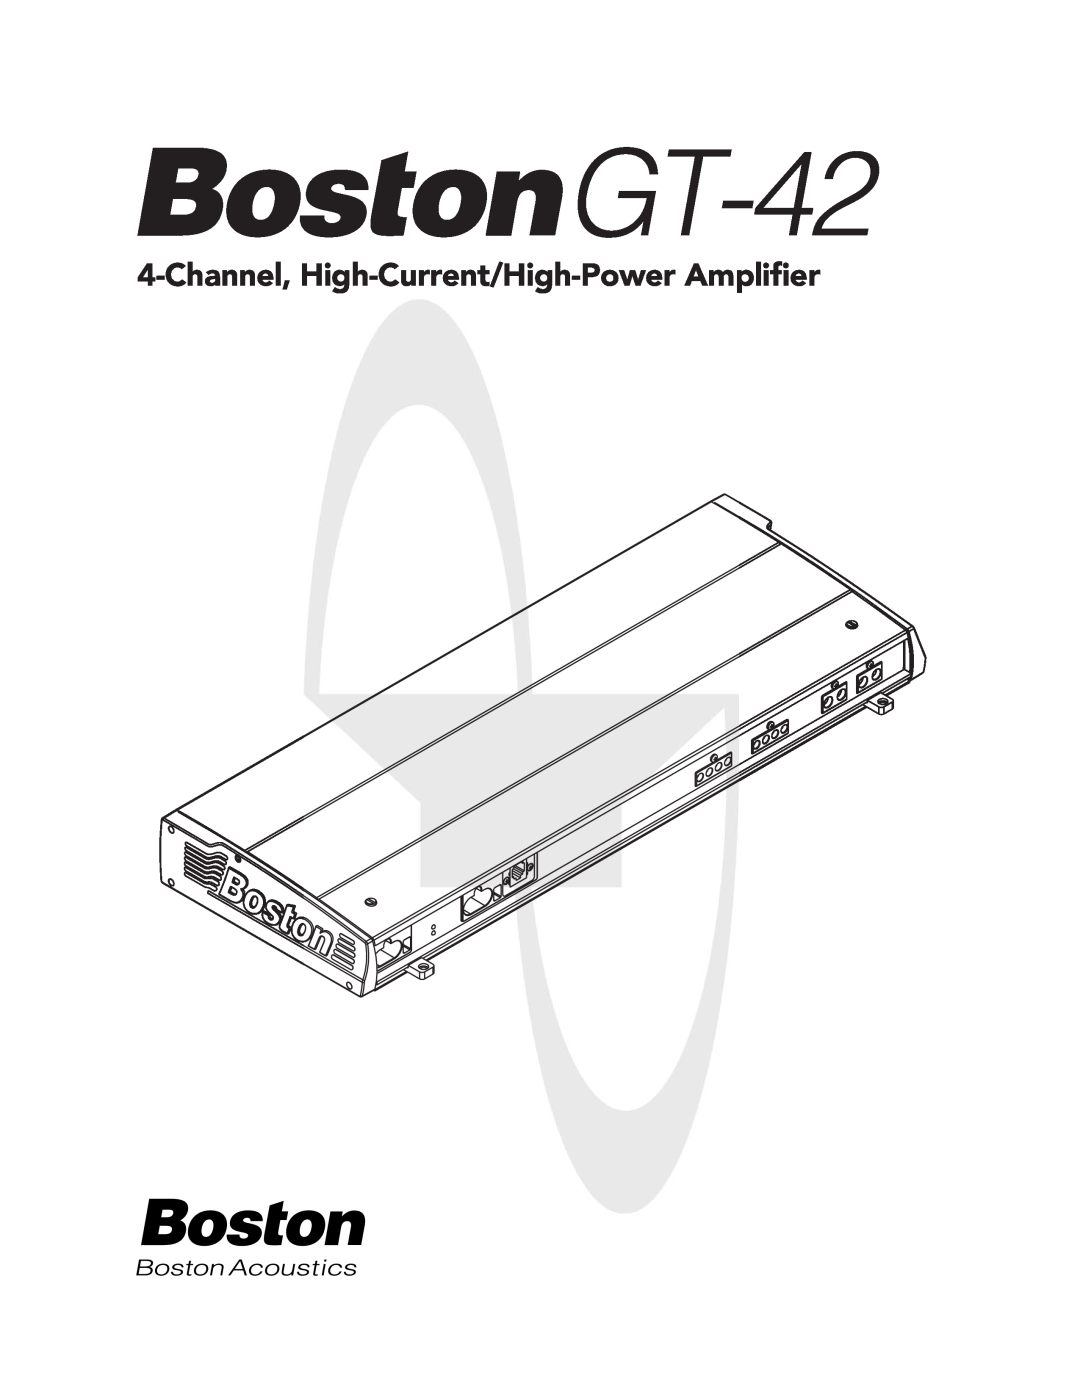 Boston Acoustics GT-424-Channel manual Channel, High-Current/High-PowerAmpliﬁer 